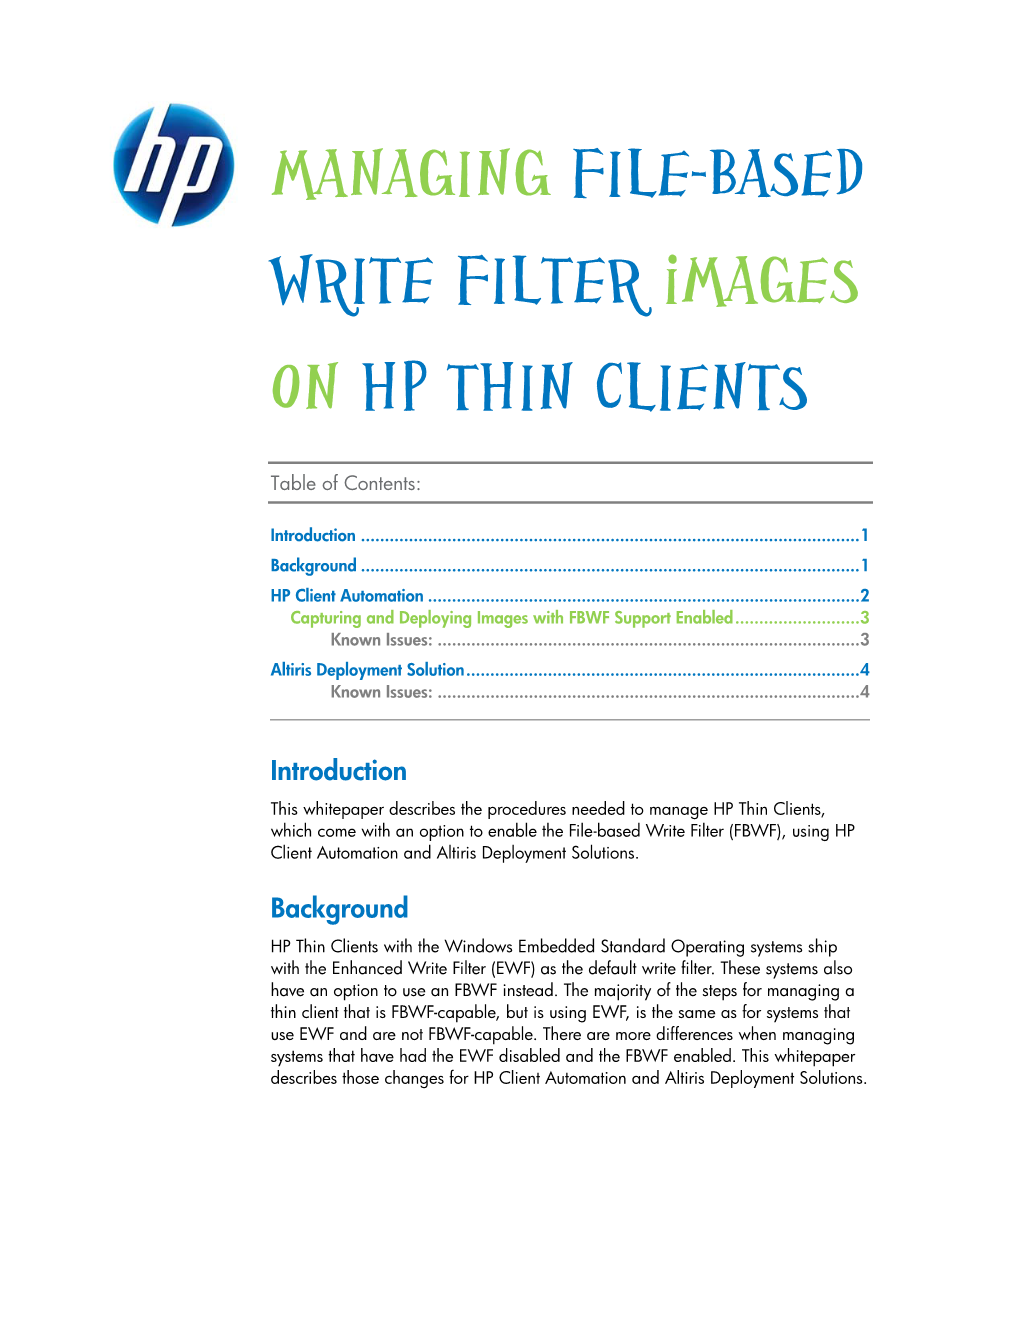 Managing File-Based Write Filter Images on HP Thin Clients